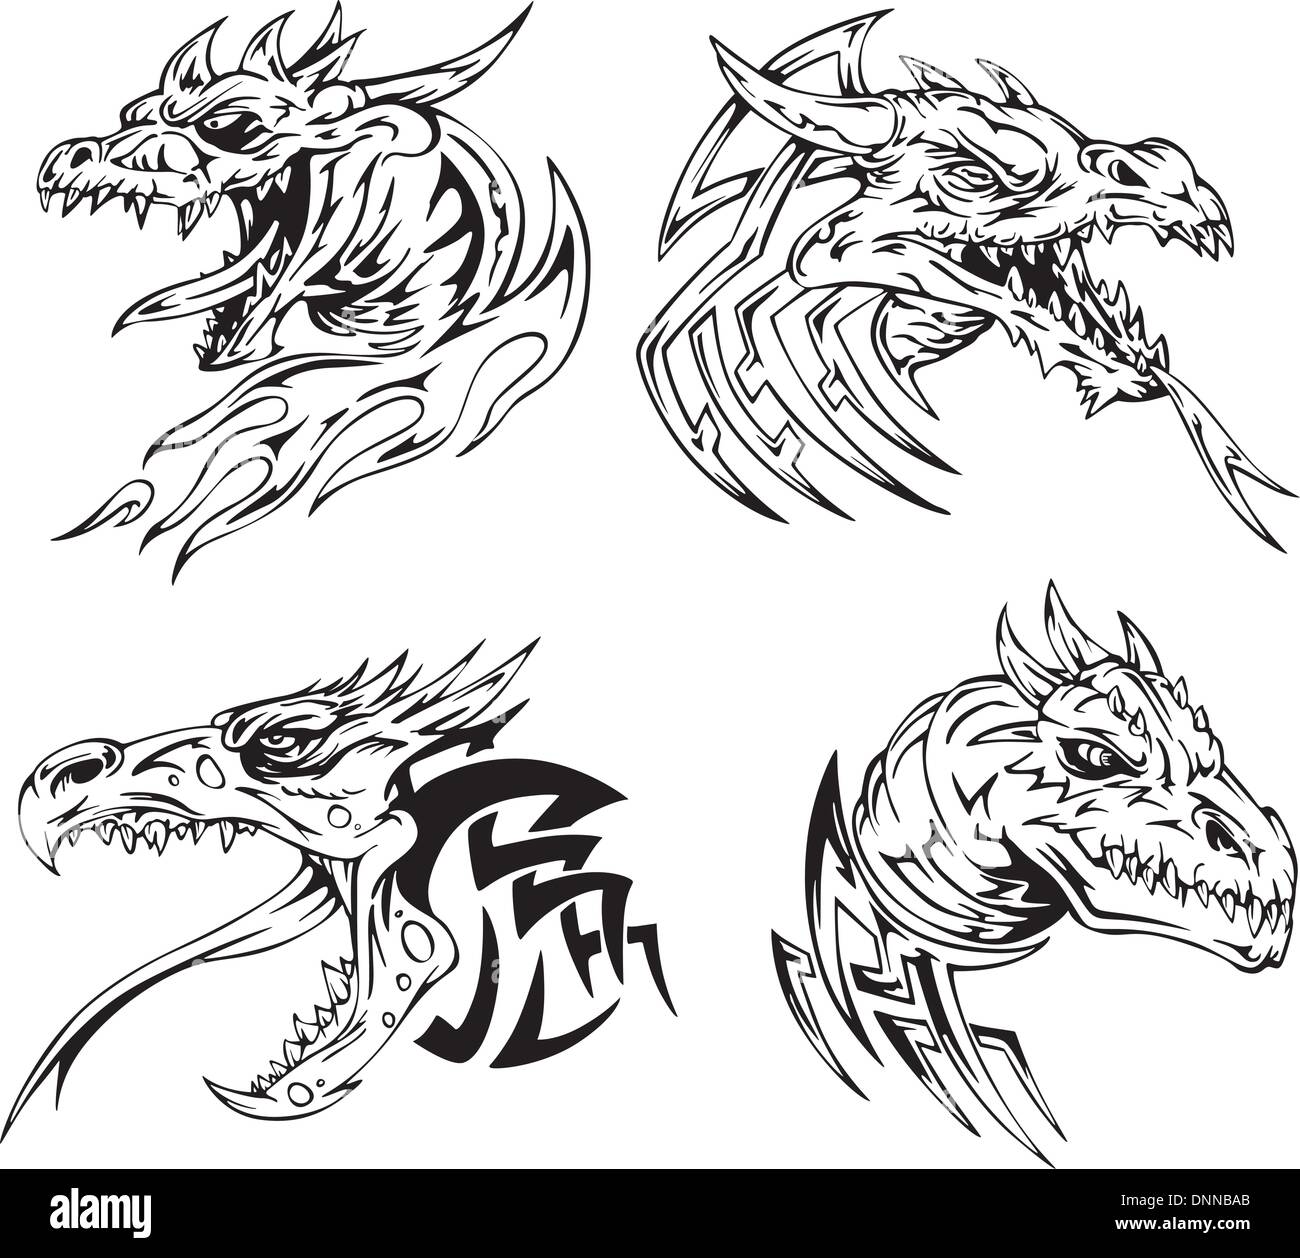 Dragon head tattoos. Set of black and white vector illustrations. Stock Vector